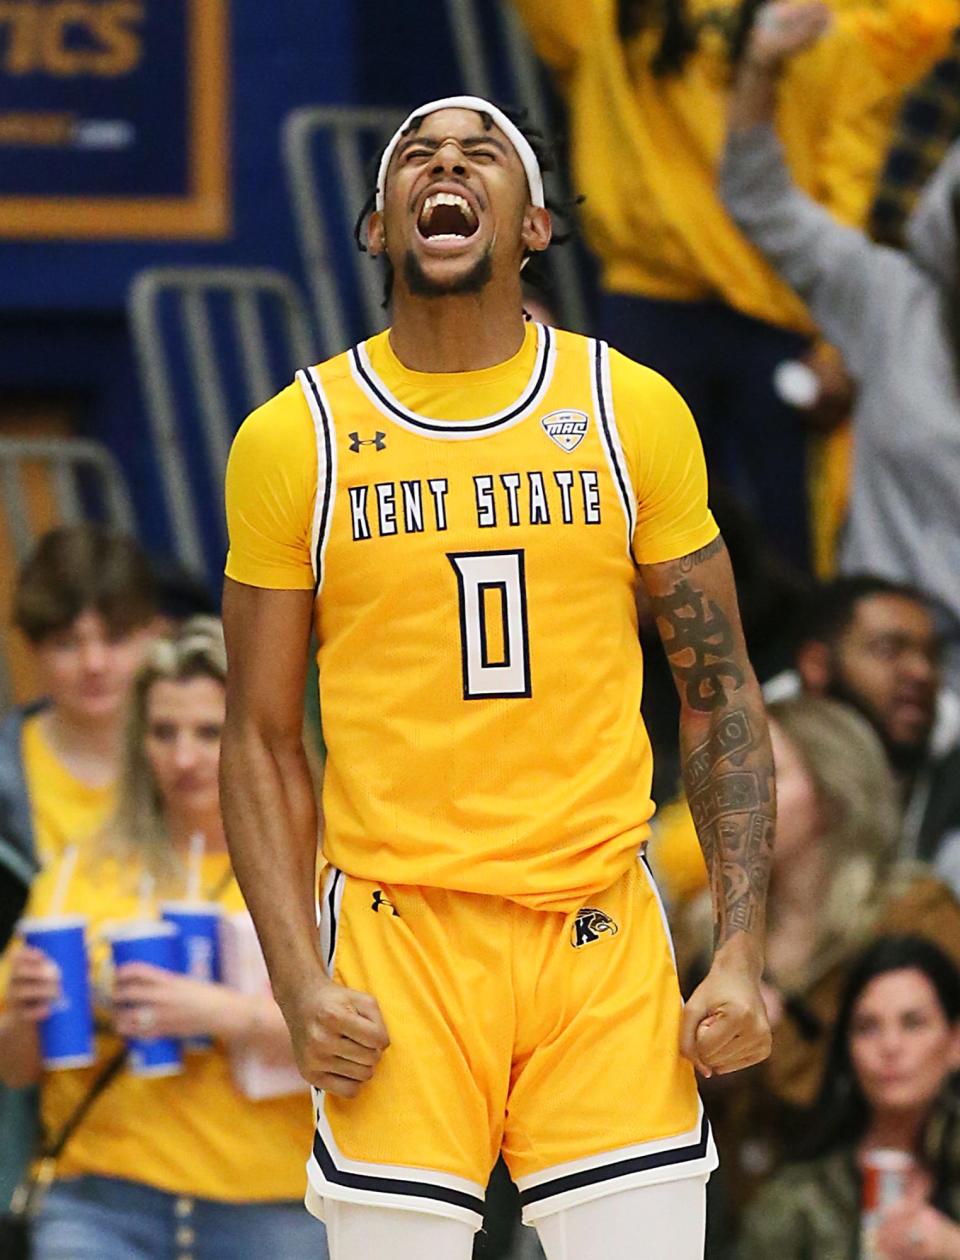 Kent State's Julius Rollins celebrates hitting a 3-pointer against Akron at the M.A.C. Center in Kent on Friday.